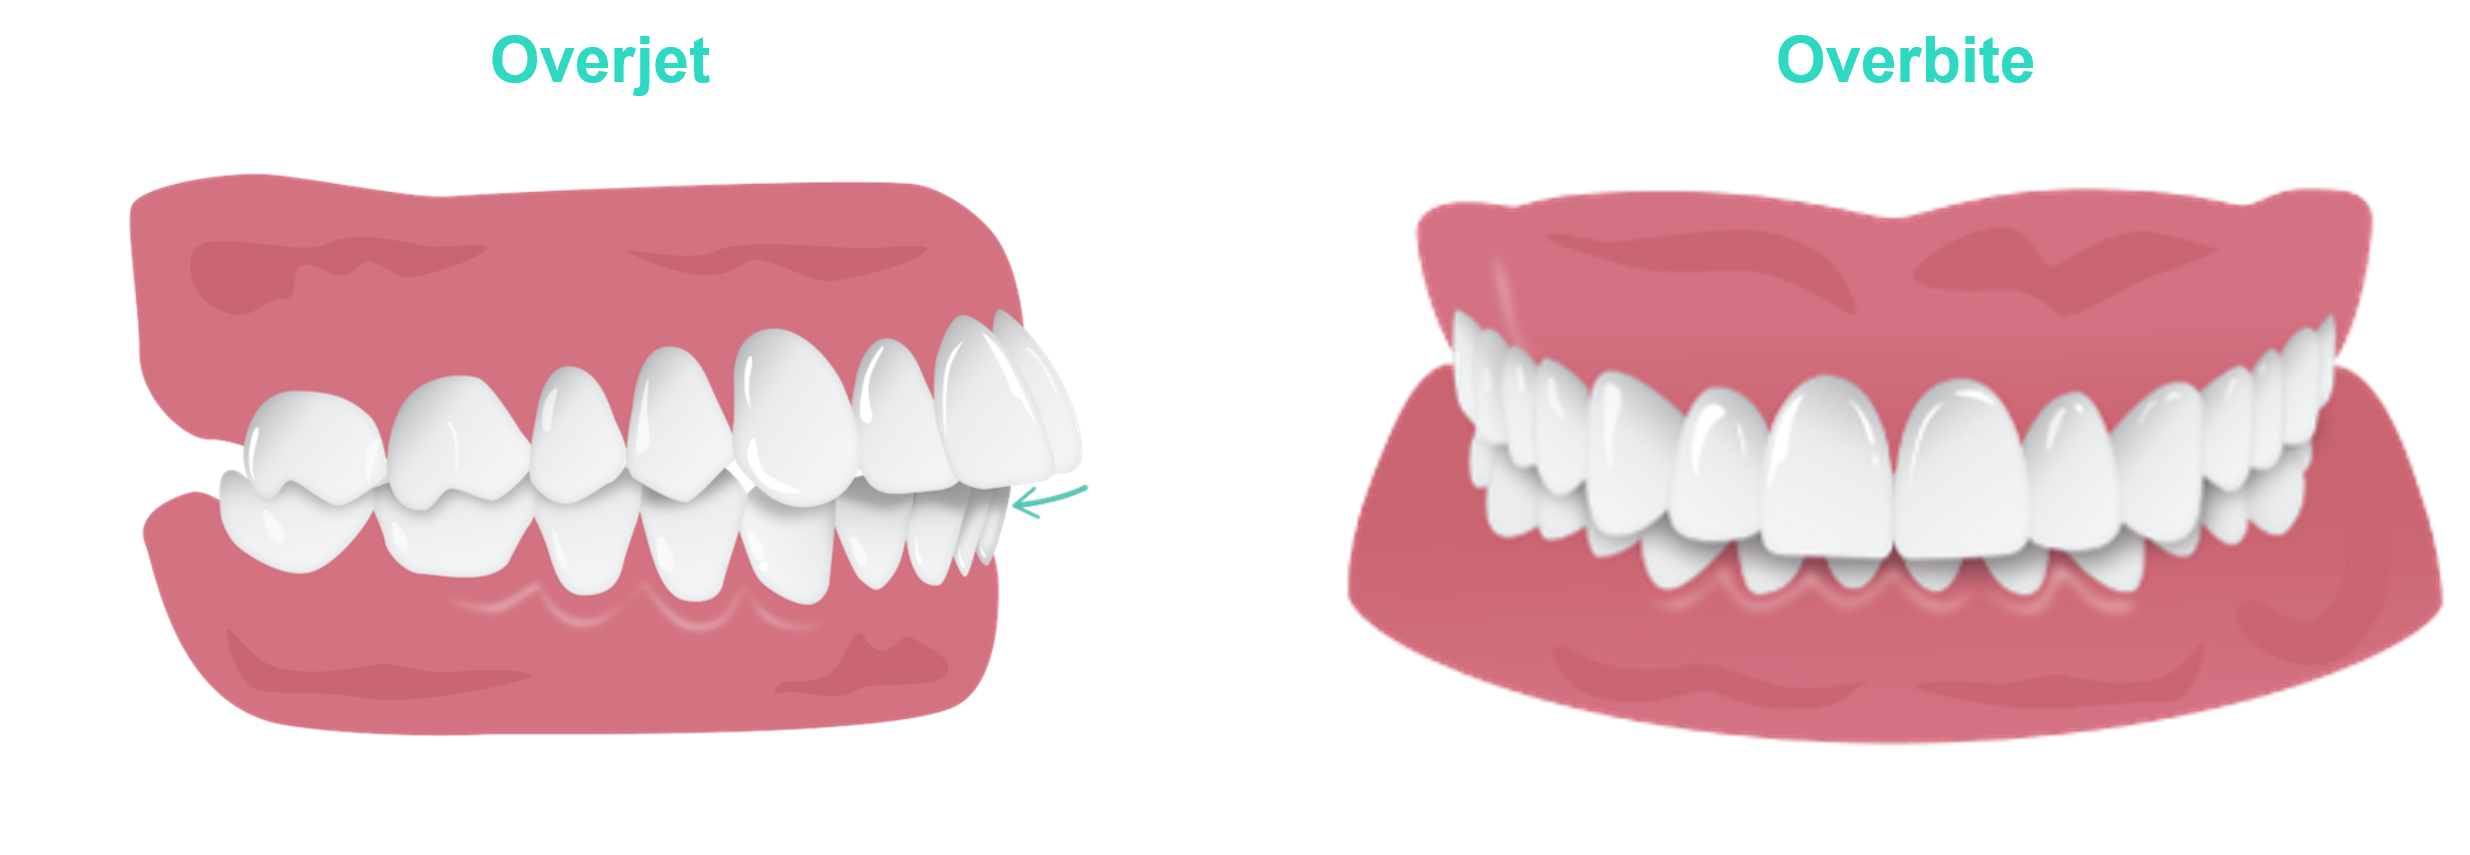 Overjet_and_Overbite.png